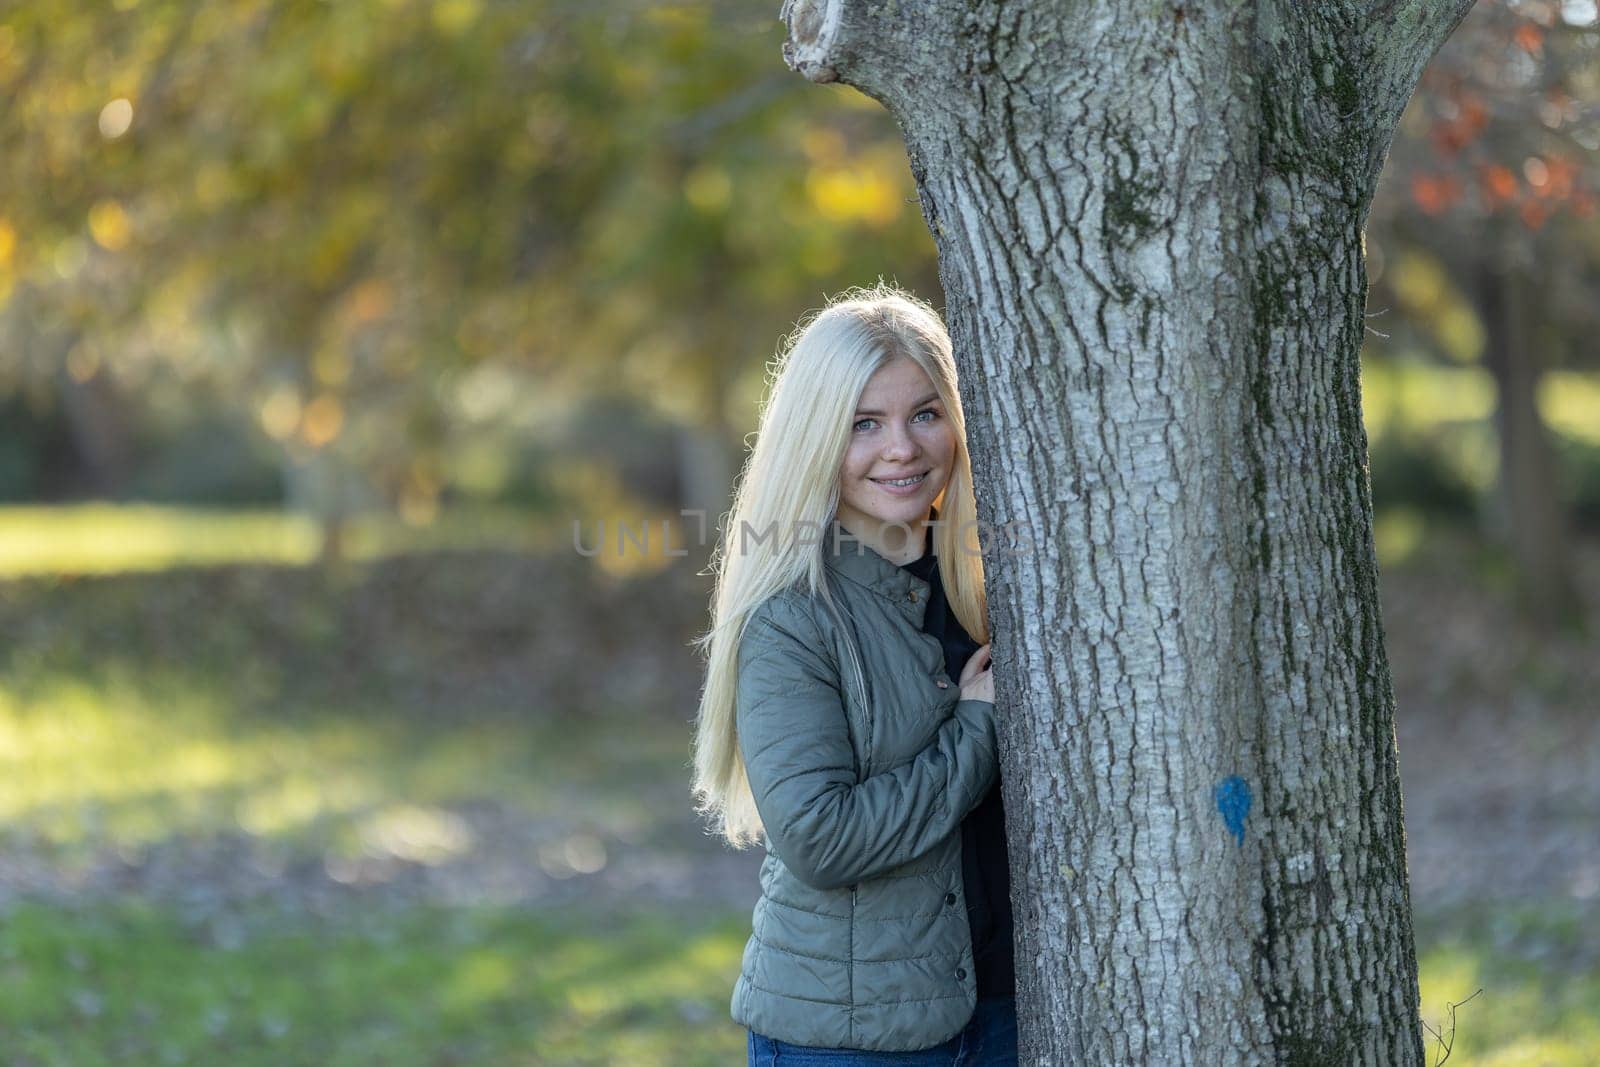 Woman with braces smiling Near Park Tree by Studia72